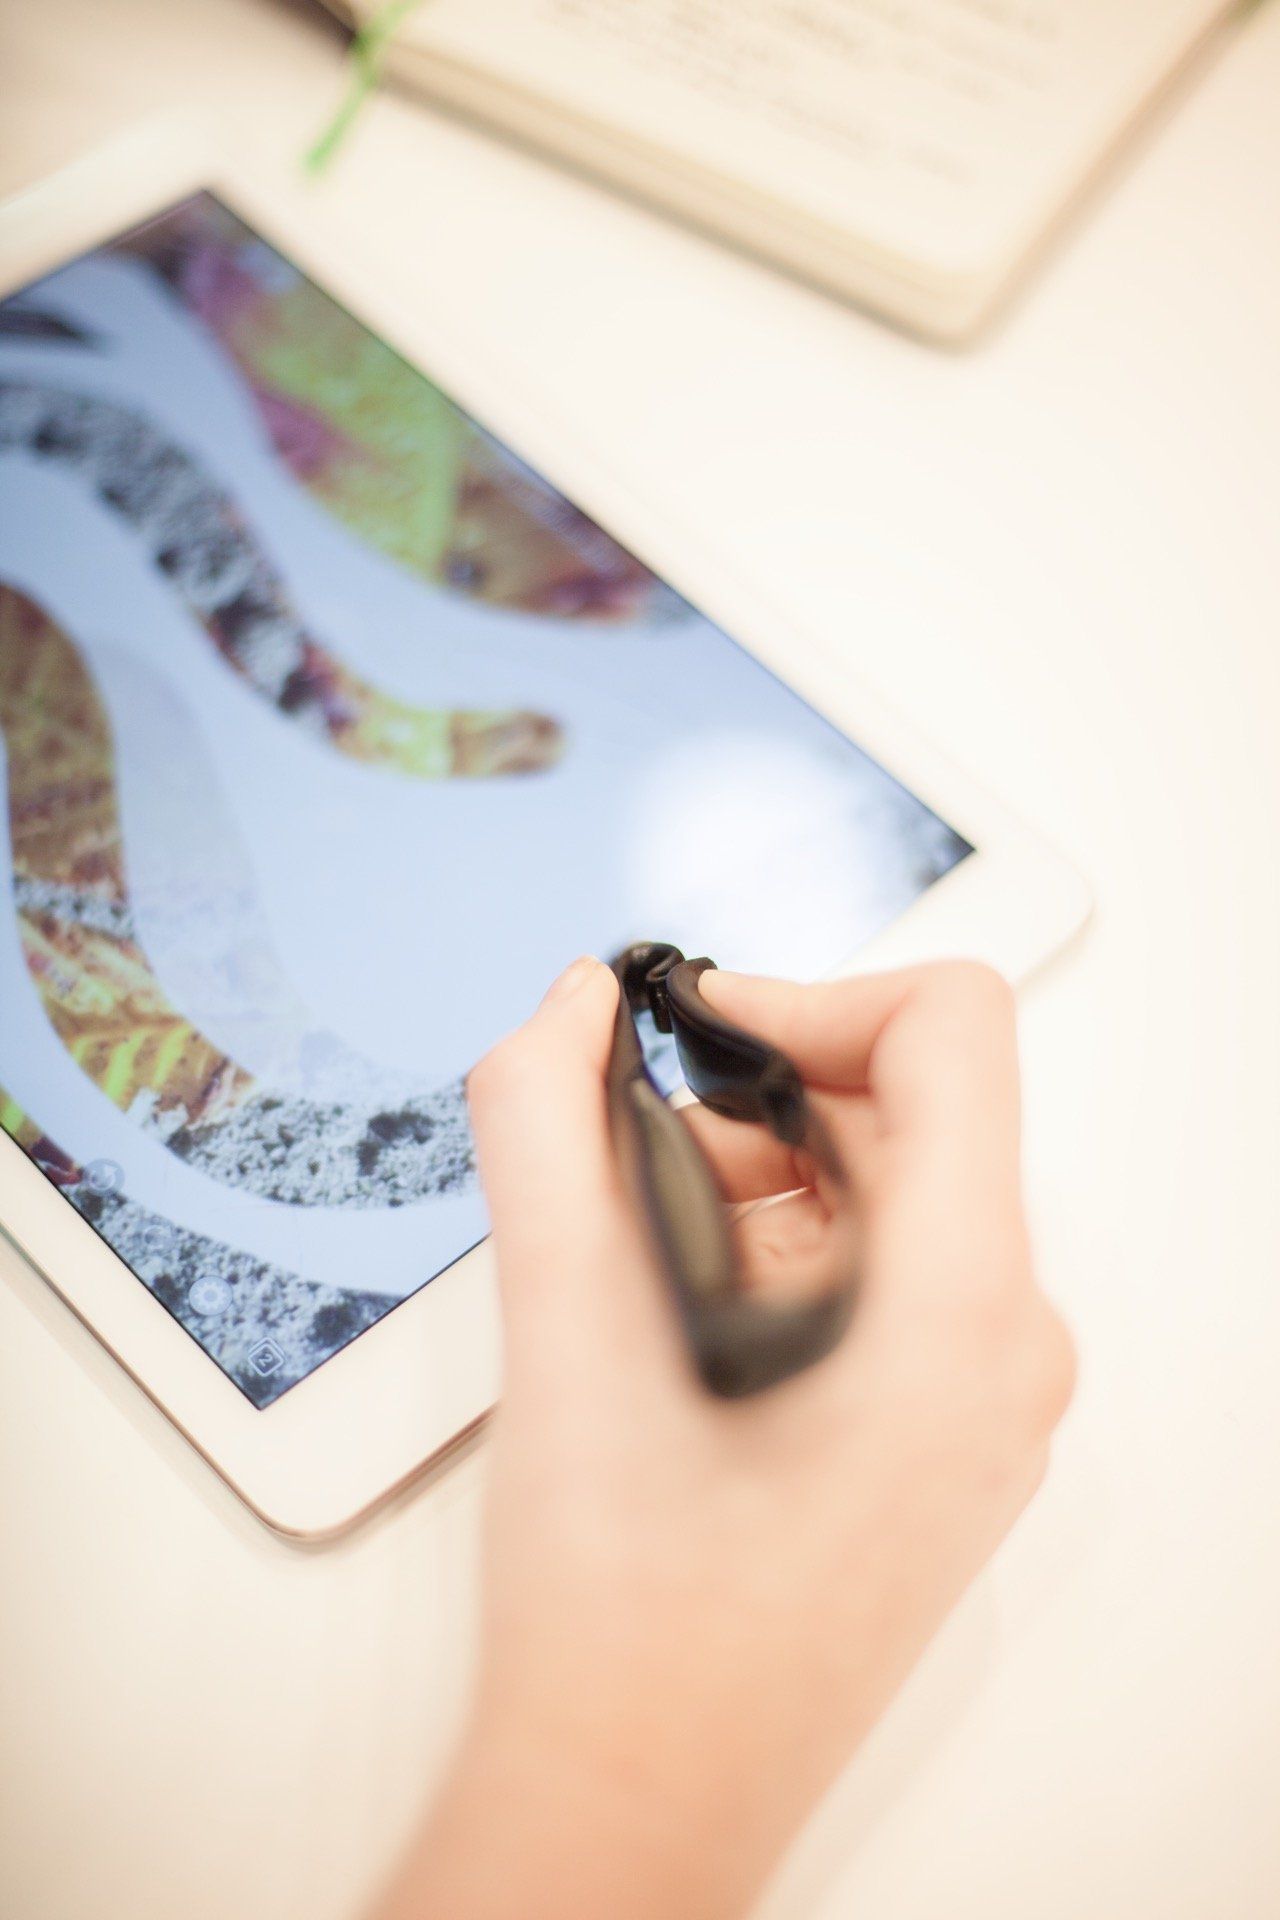 A picture of someone using a scriba stylus to draw on their touchscreen device